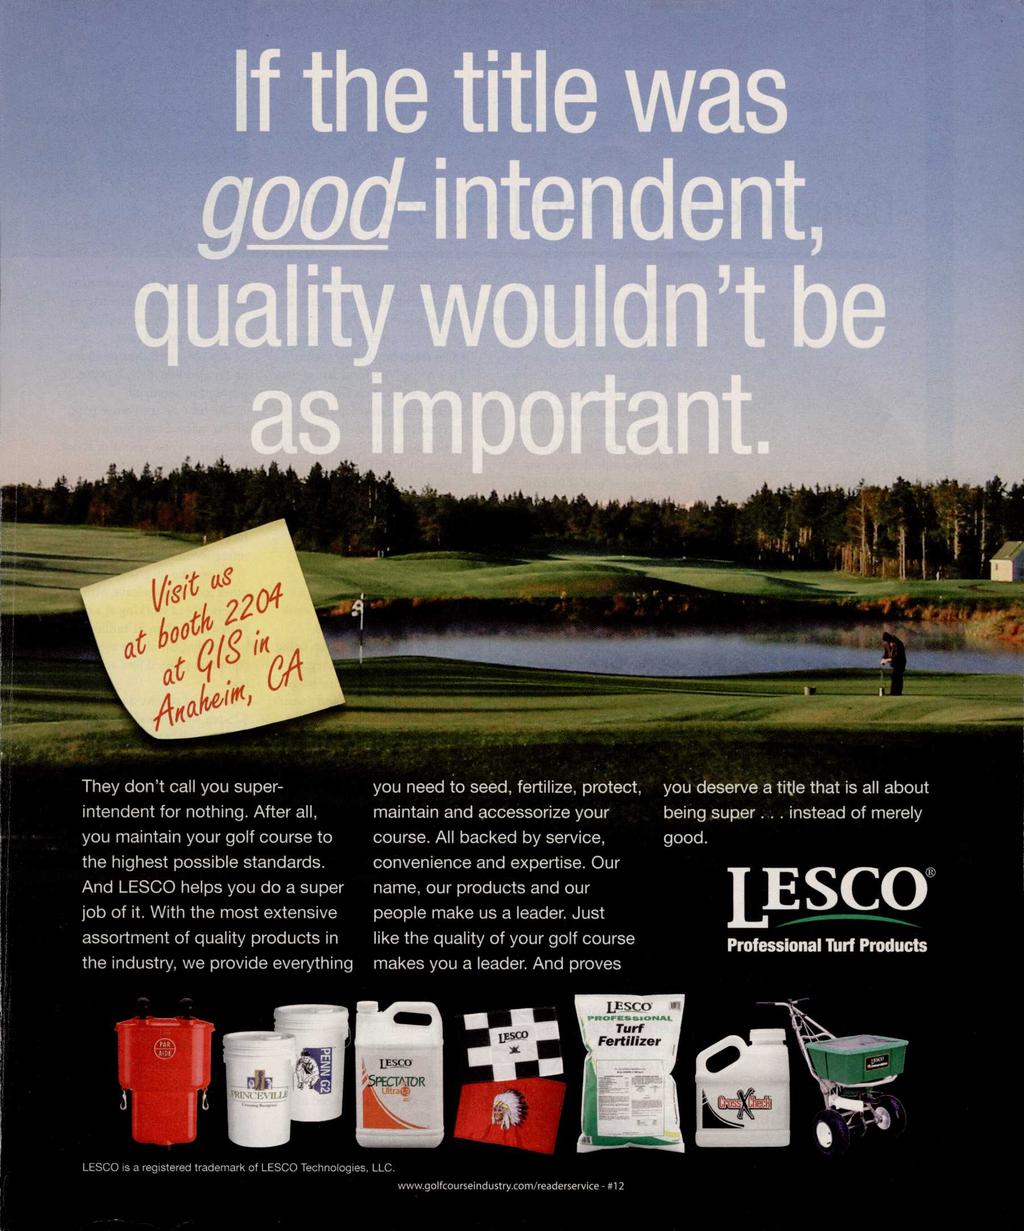 They don t call you superintendent for nothing. After all, you maintain your golf course to the highest possible standards. And LESCO helps you do a super job of it.